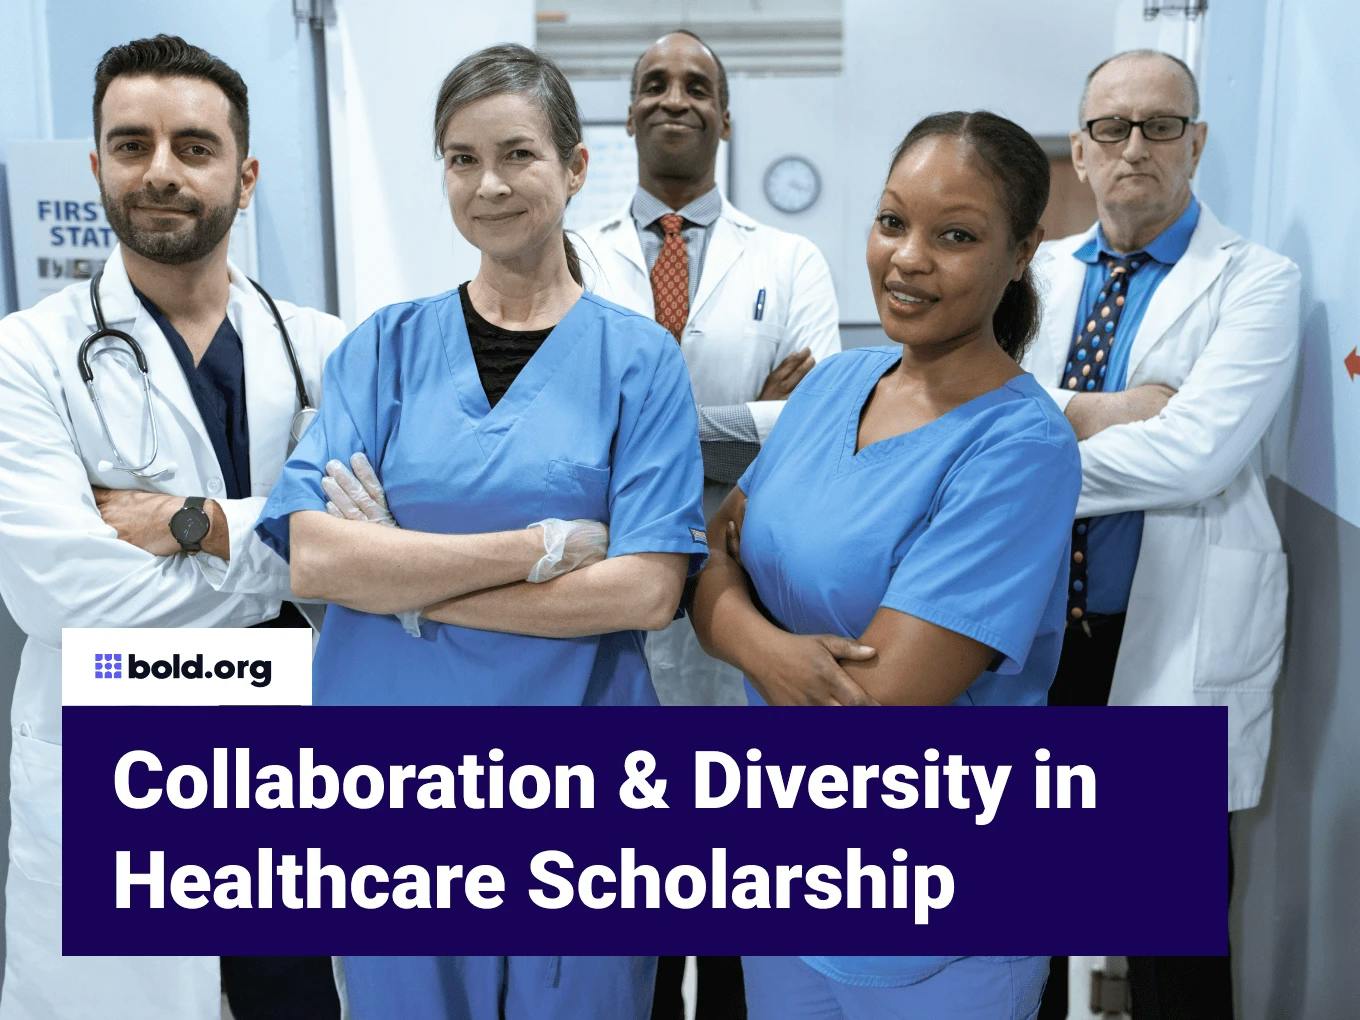 Collaboration & Diversity in Healthcare Scholarship